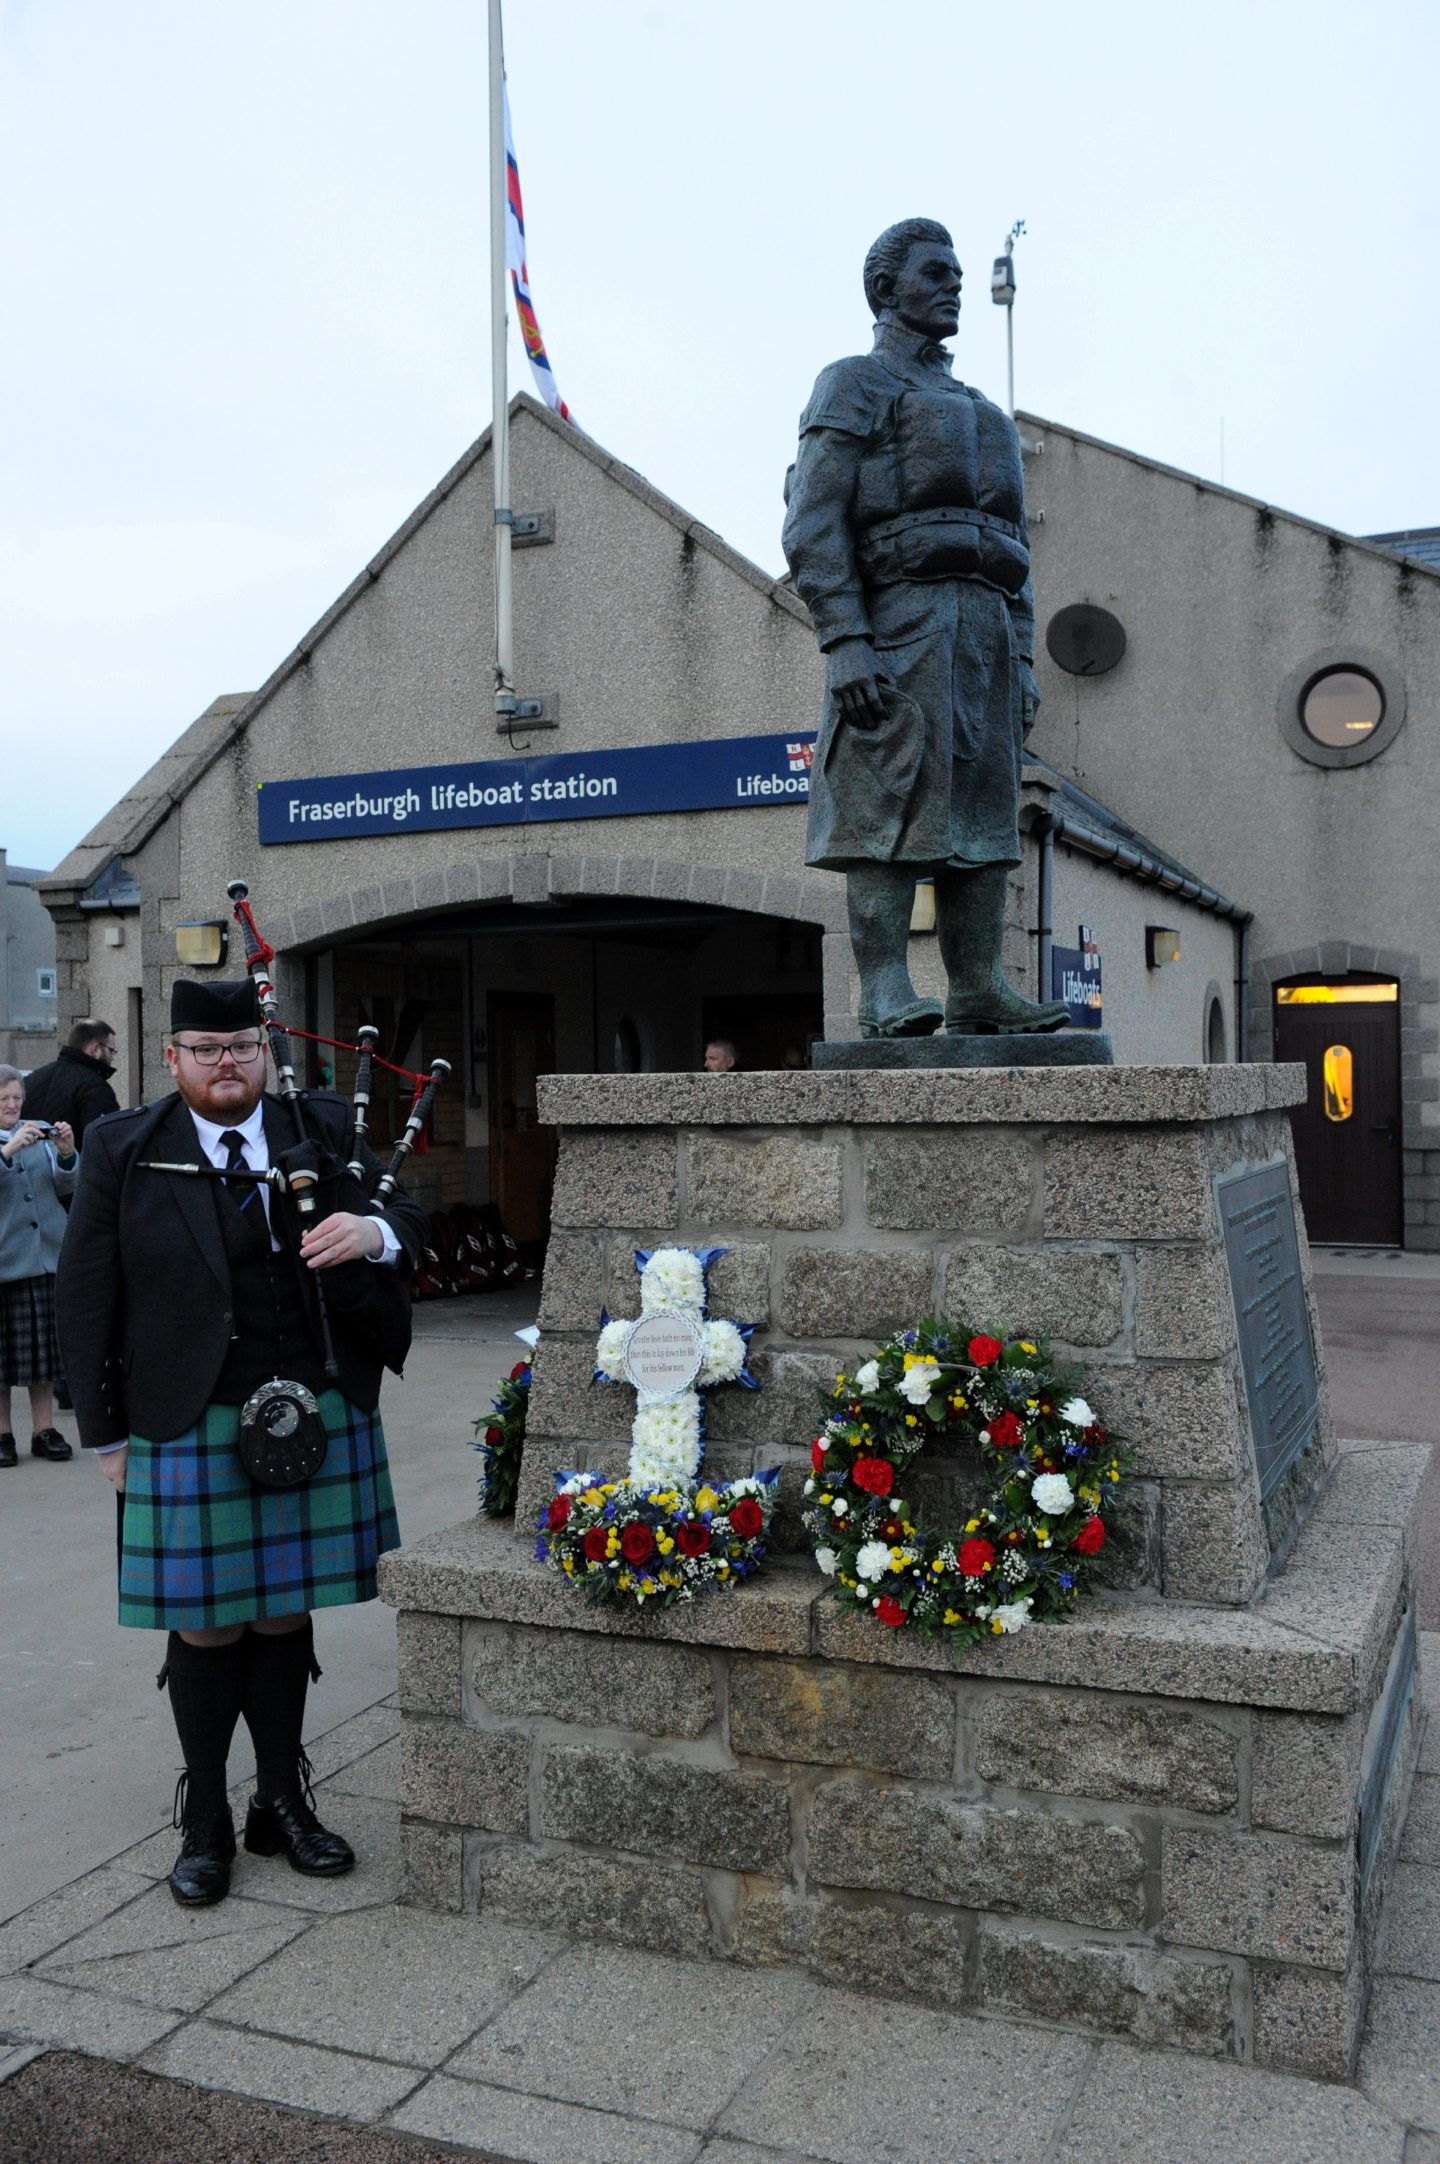 Piper at the memorial to mark the 50th anniversary of the Fraserburgh lifeboat disaster.